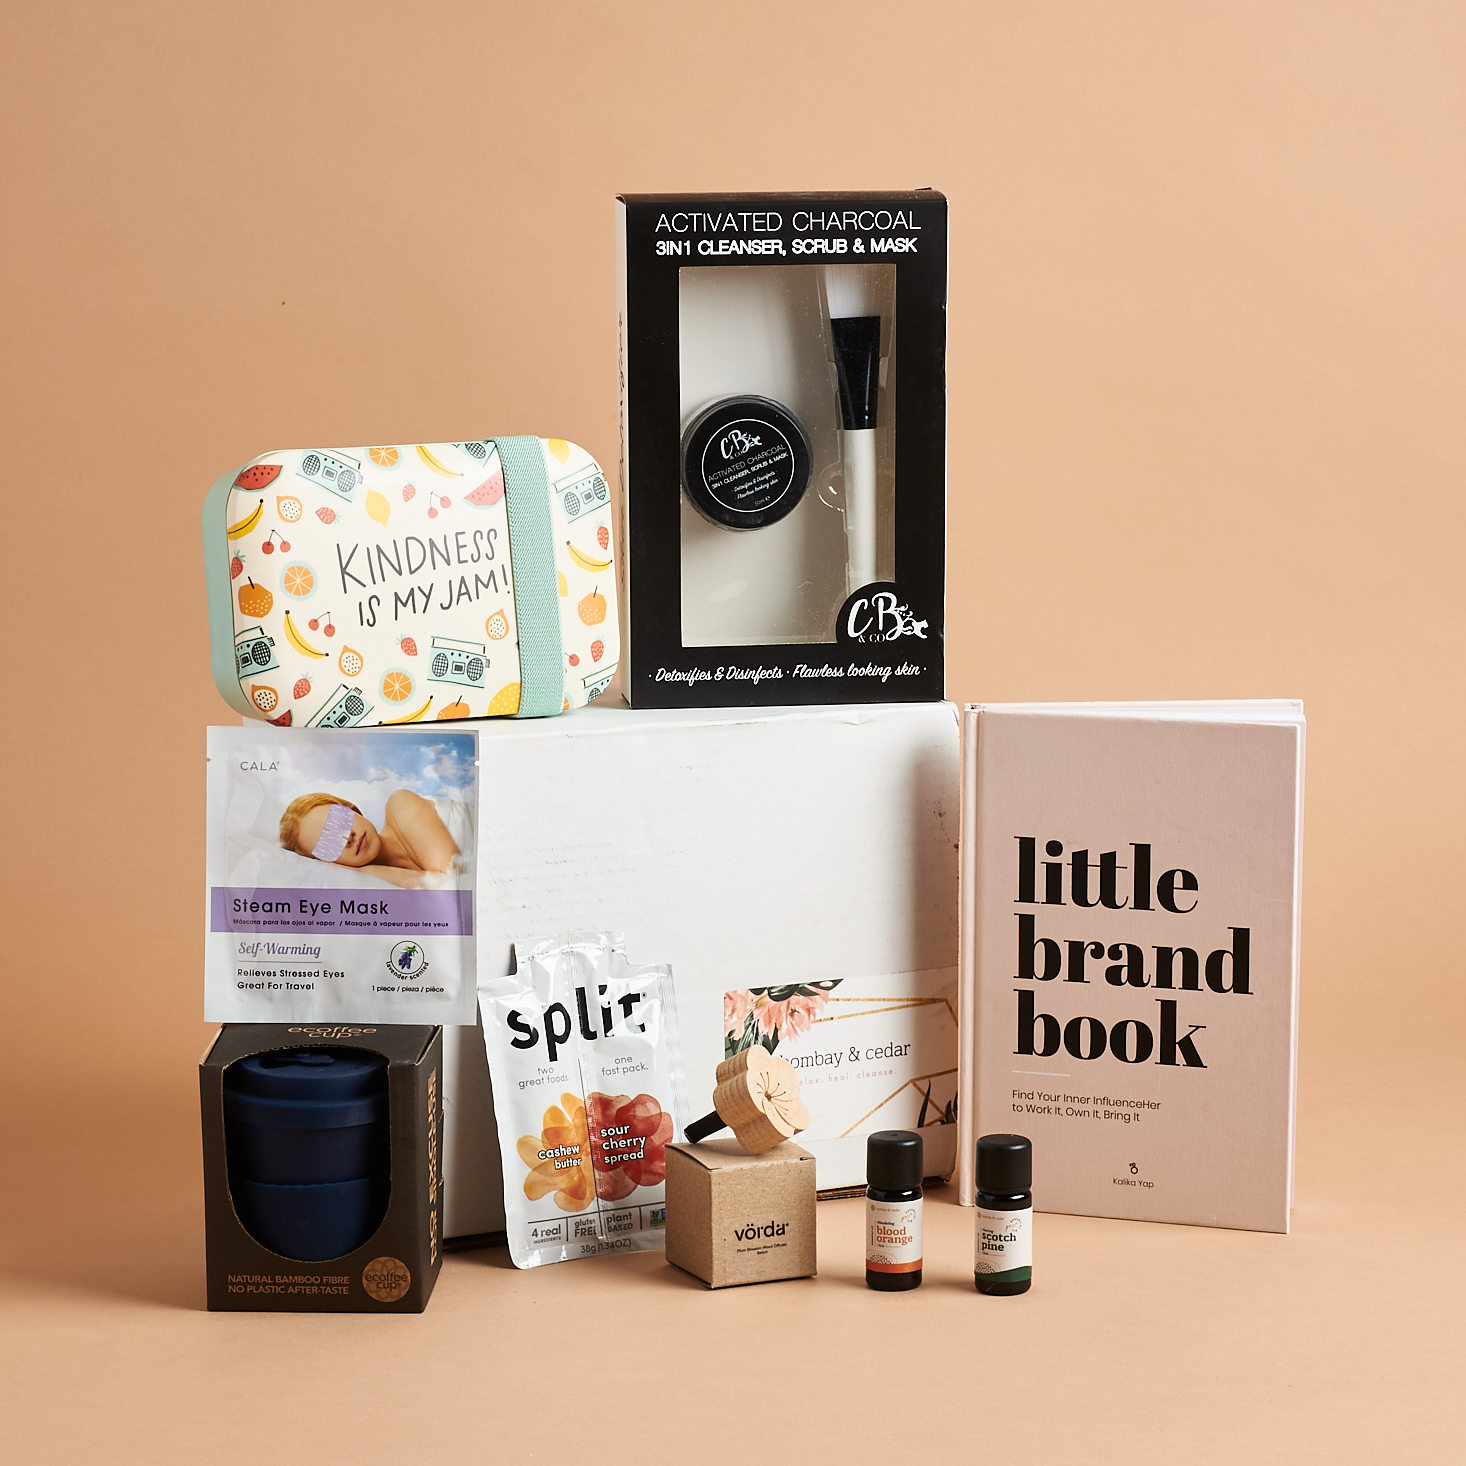 Bombay & Cedar Lifestyle Box Review + Coupon – March 2021